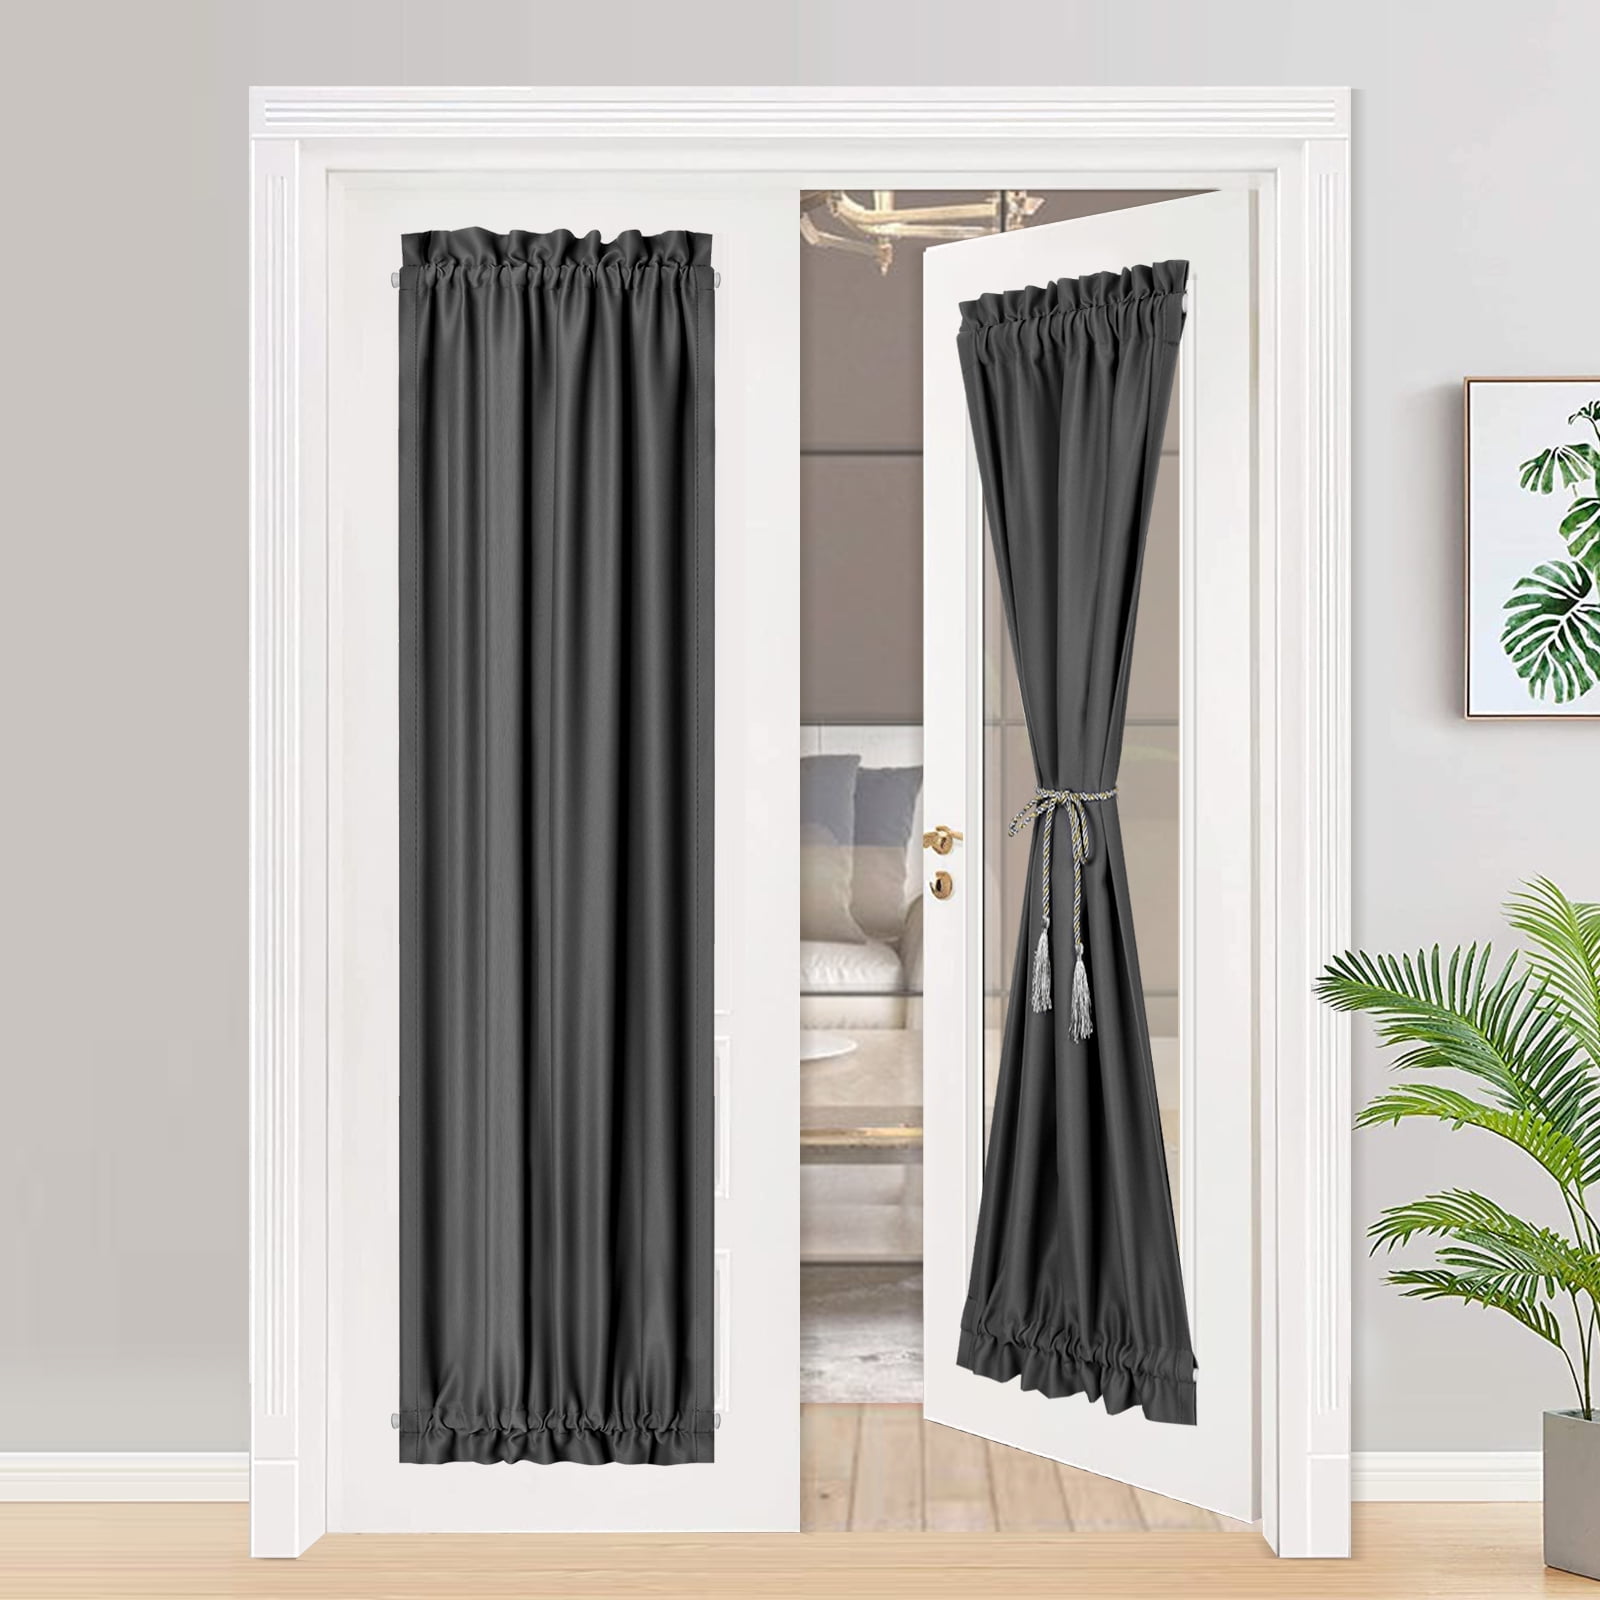 Lapalife Blackout Door Curtains 24 X 72 Inch French Curtain Thermal Insulated Privacy Panel Rod Pocket Glass Black 1 Com